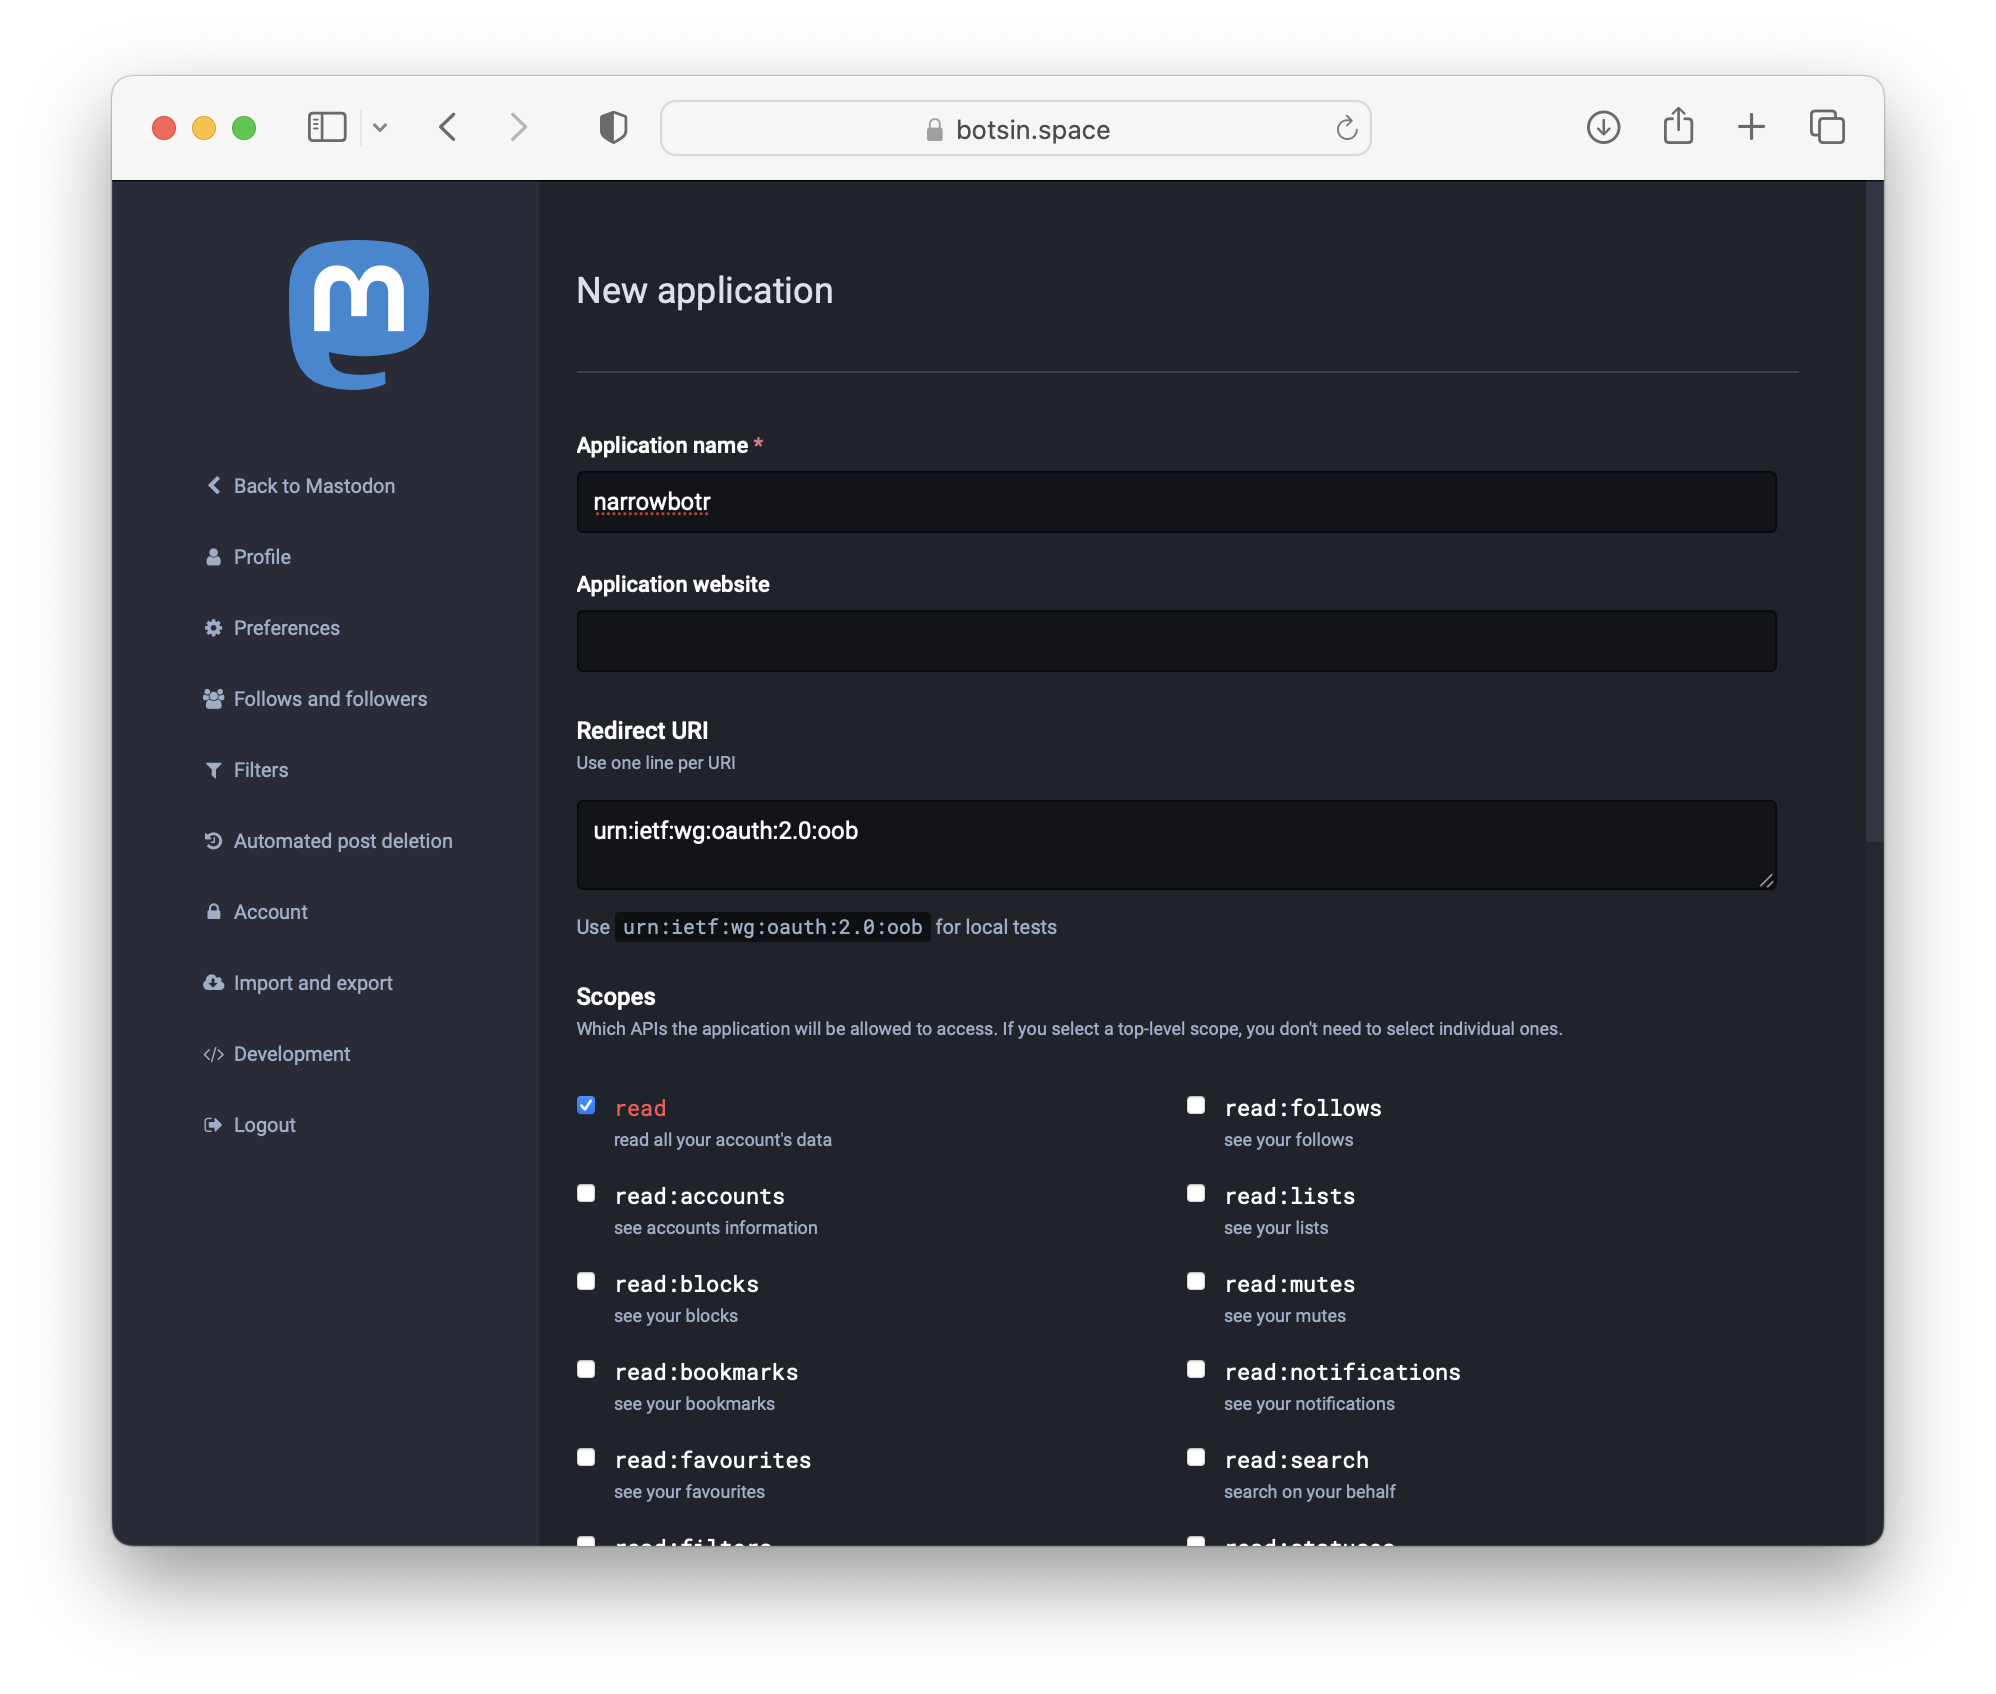 Screenshot of the page to register a new application with the Mastodon API.